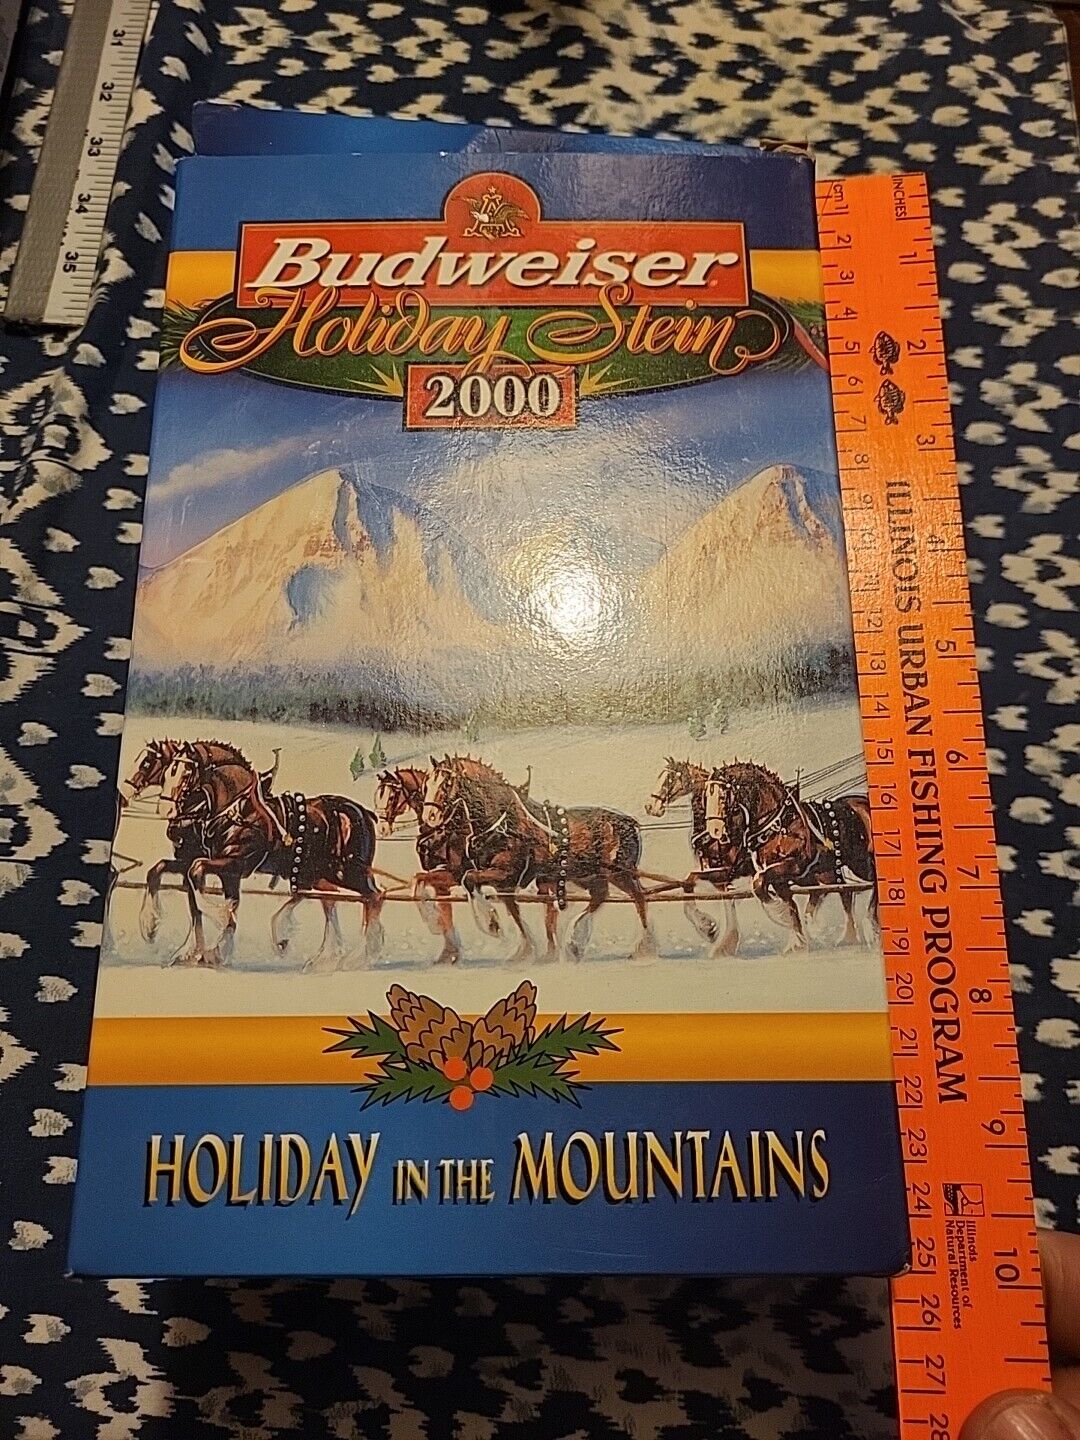 2000 Budweiser Holiday Stein Signature Edition CS416SE Holiday In The Mountains